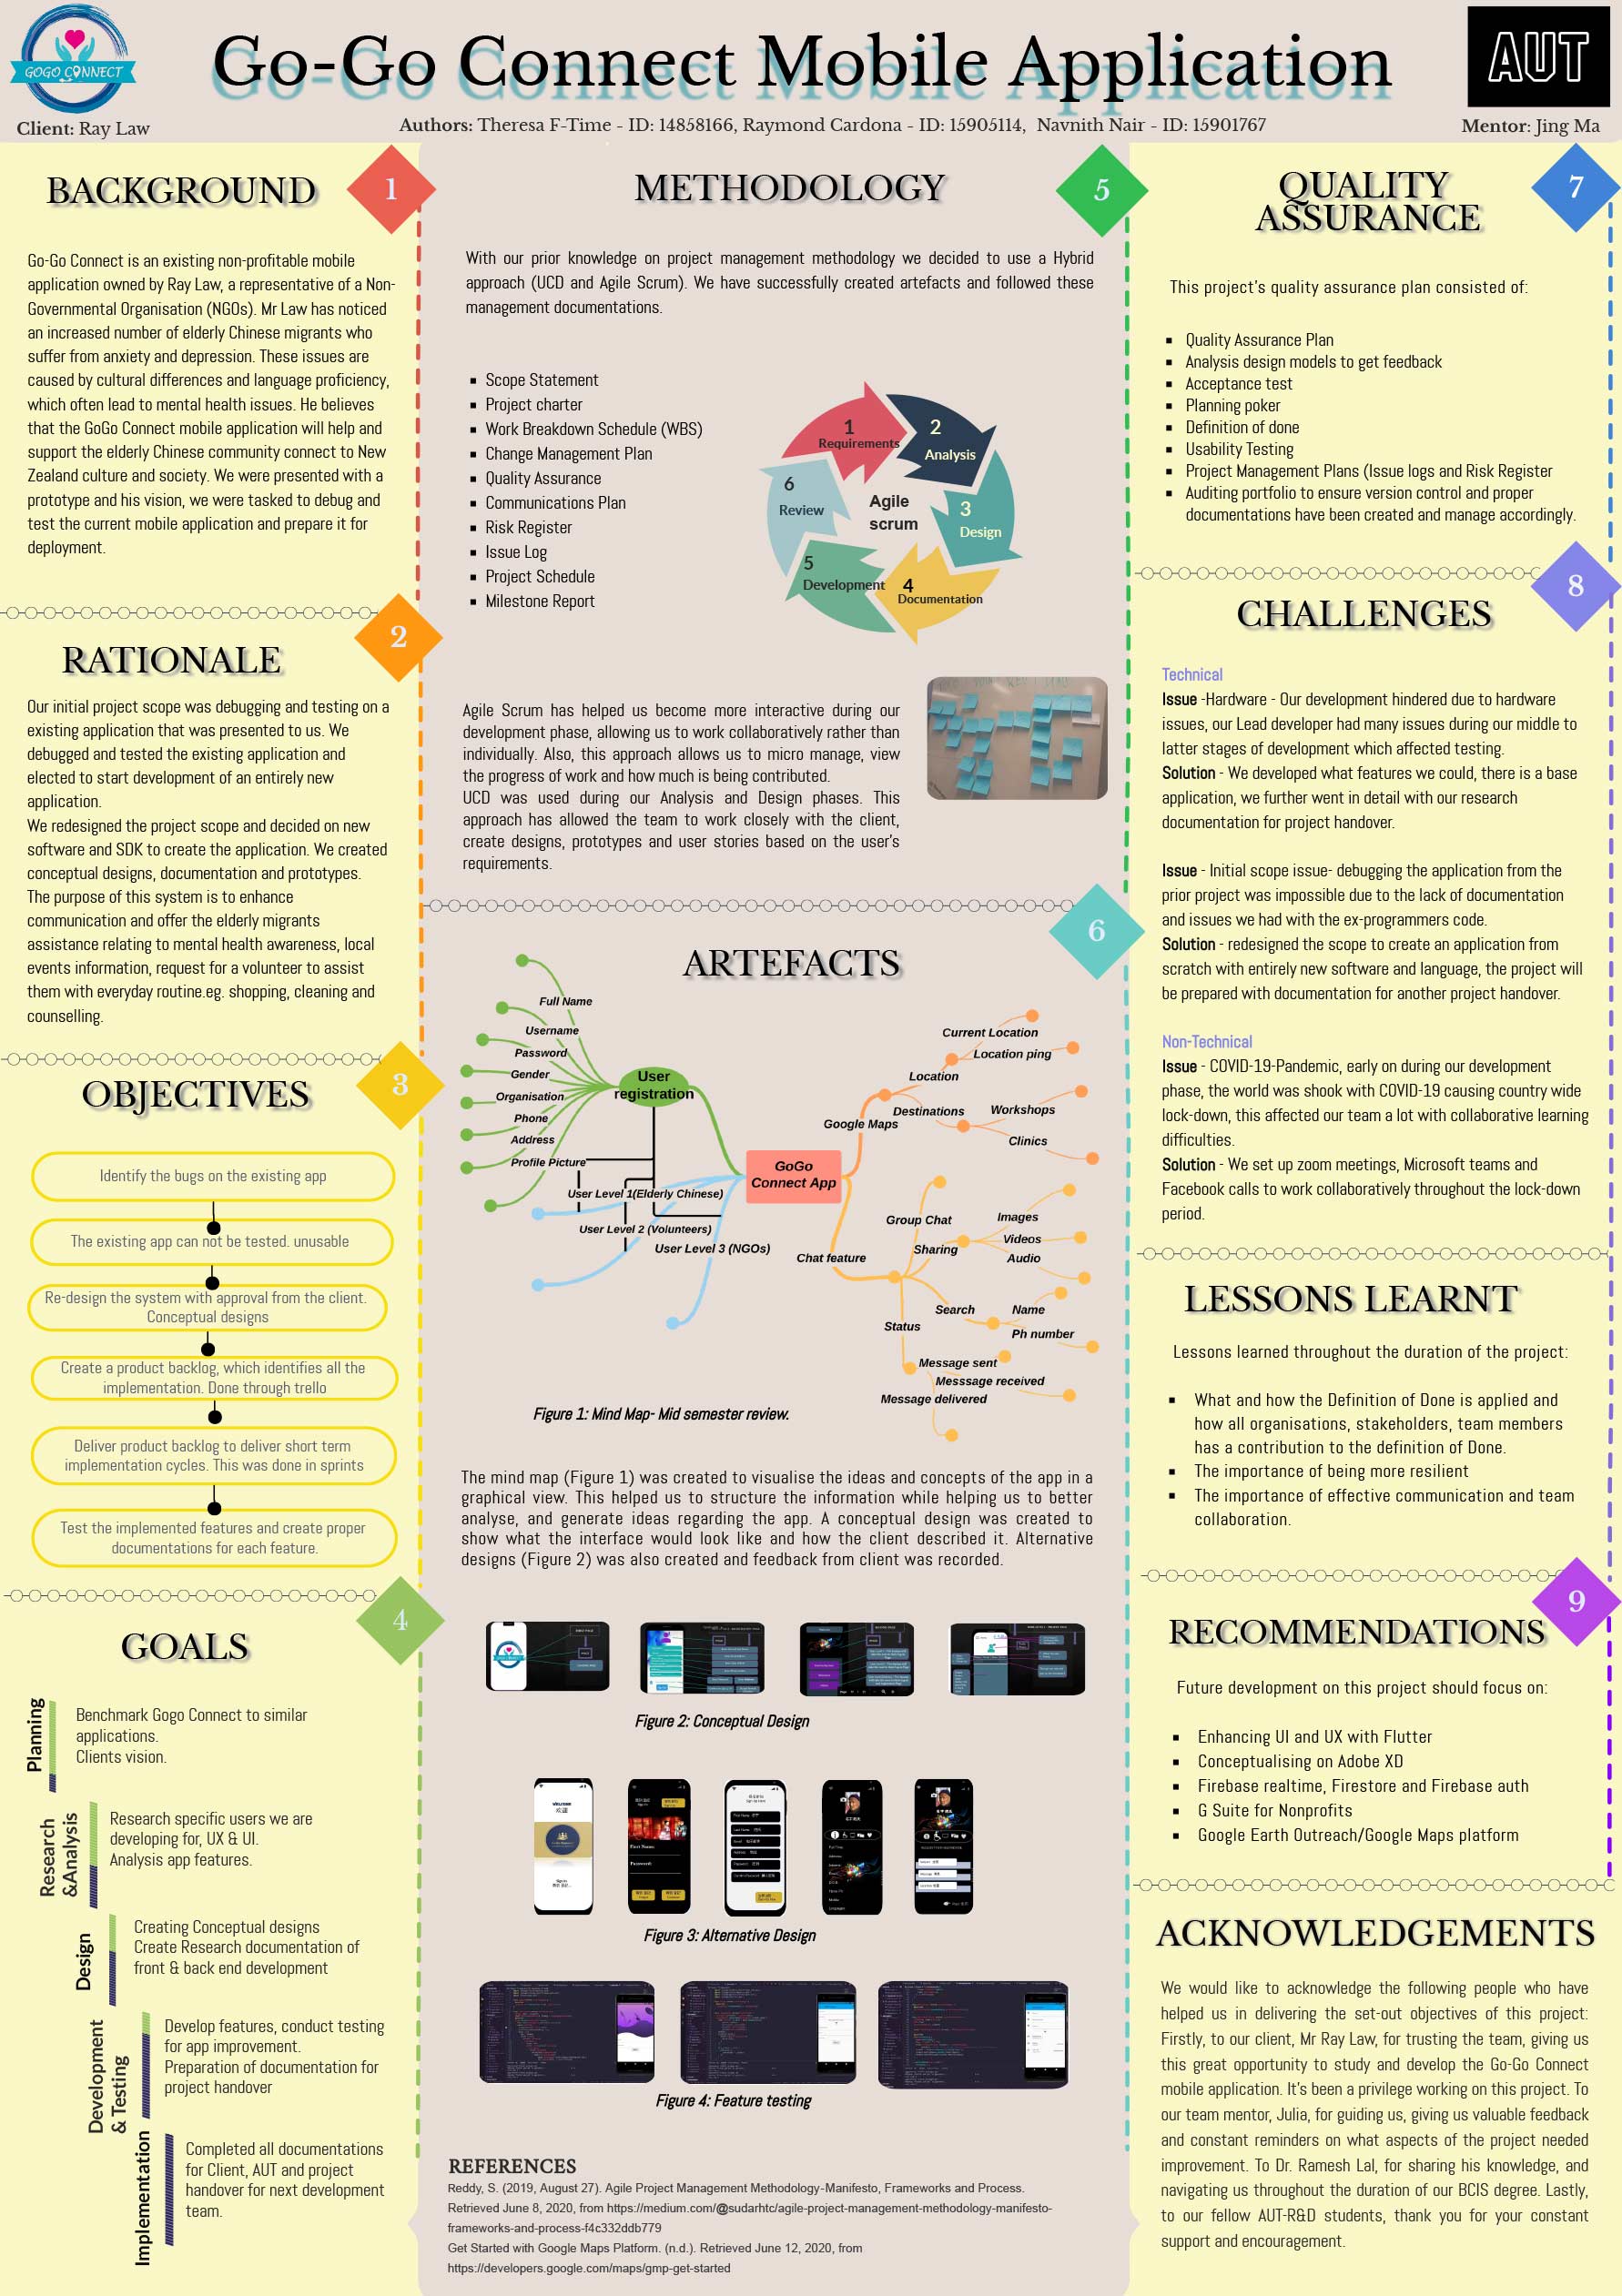 Science poster